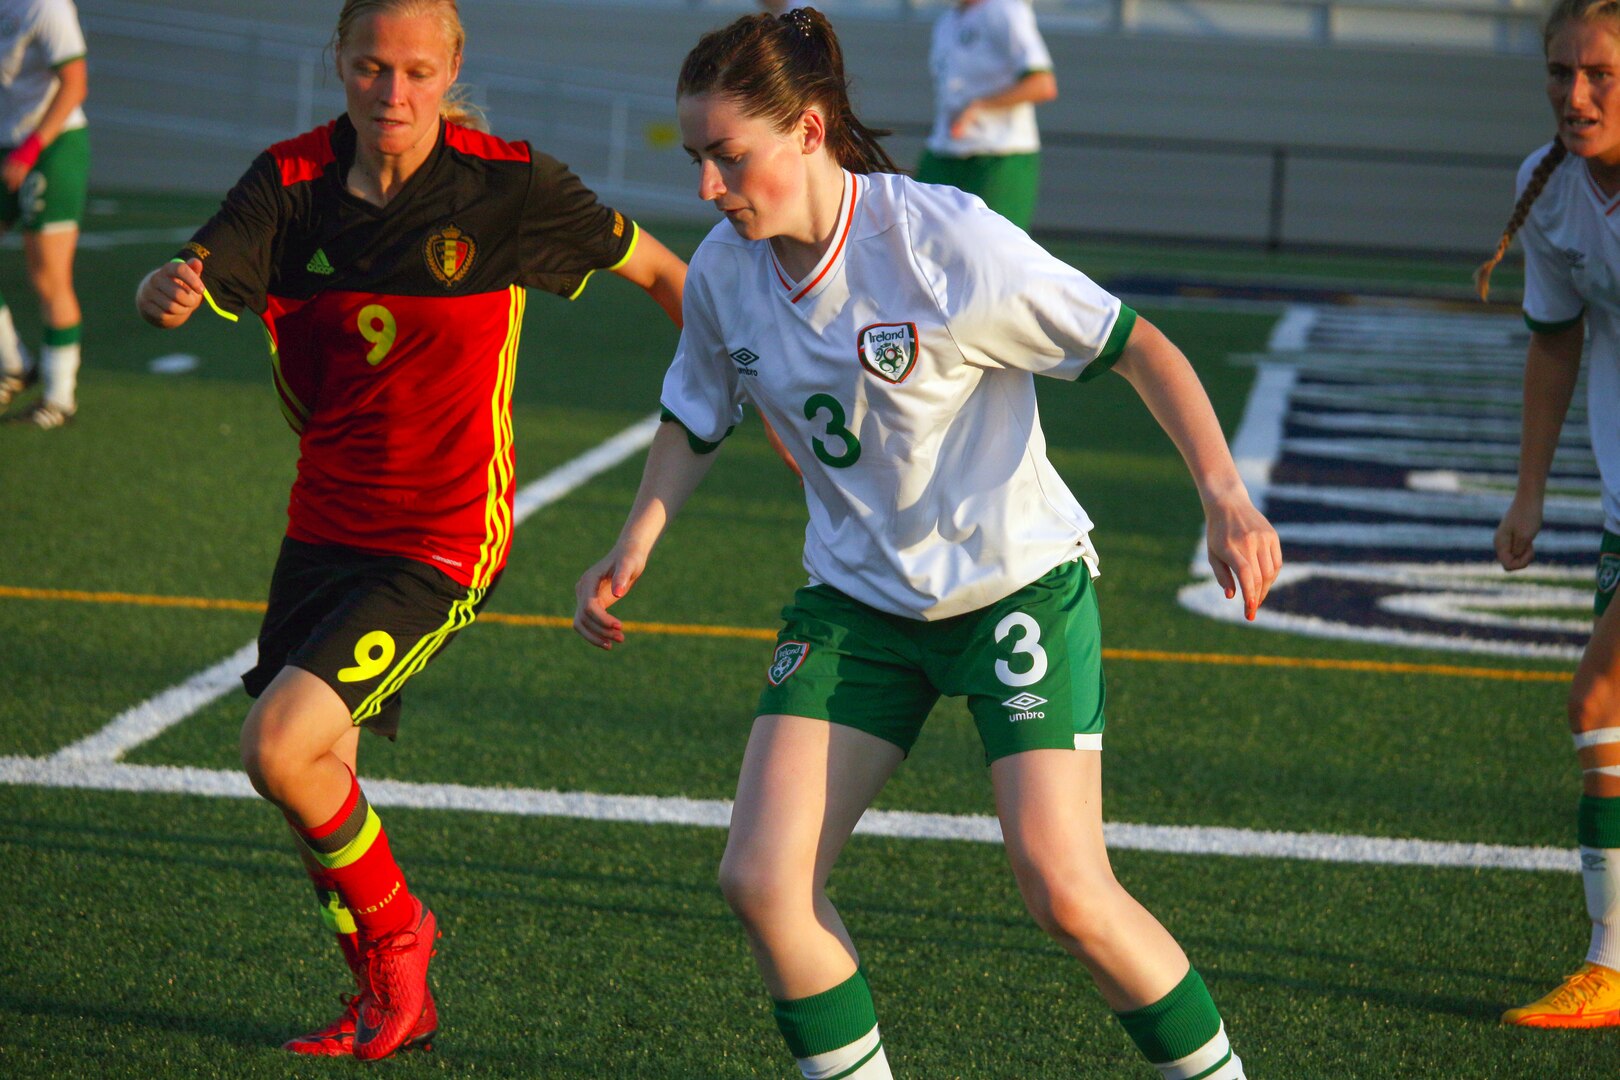 Ireland's #3 Leah Walsh and Belgium's #9 Laura Vanlerberghe go after the ball in match 14 of the 13th Conseil International du Sport Militaire (CISM) World Women's Military Football Championship hosted by Fairchild Air Force Base in Spokane, Washingon.  This year's championship features teams from the United States, Belgium, Cameroon, Canada, France, Germany, Ireland, Mali, Netherlands, and South Korea.  (Department of Defense Photo by Mr. Steven Dinote, released).